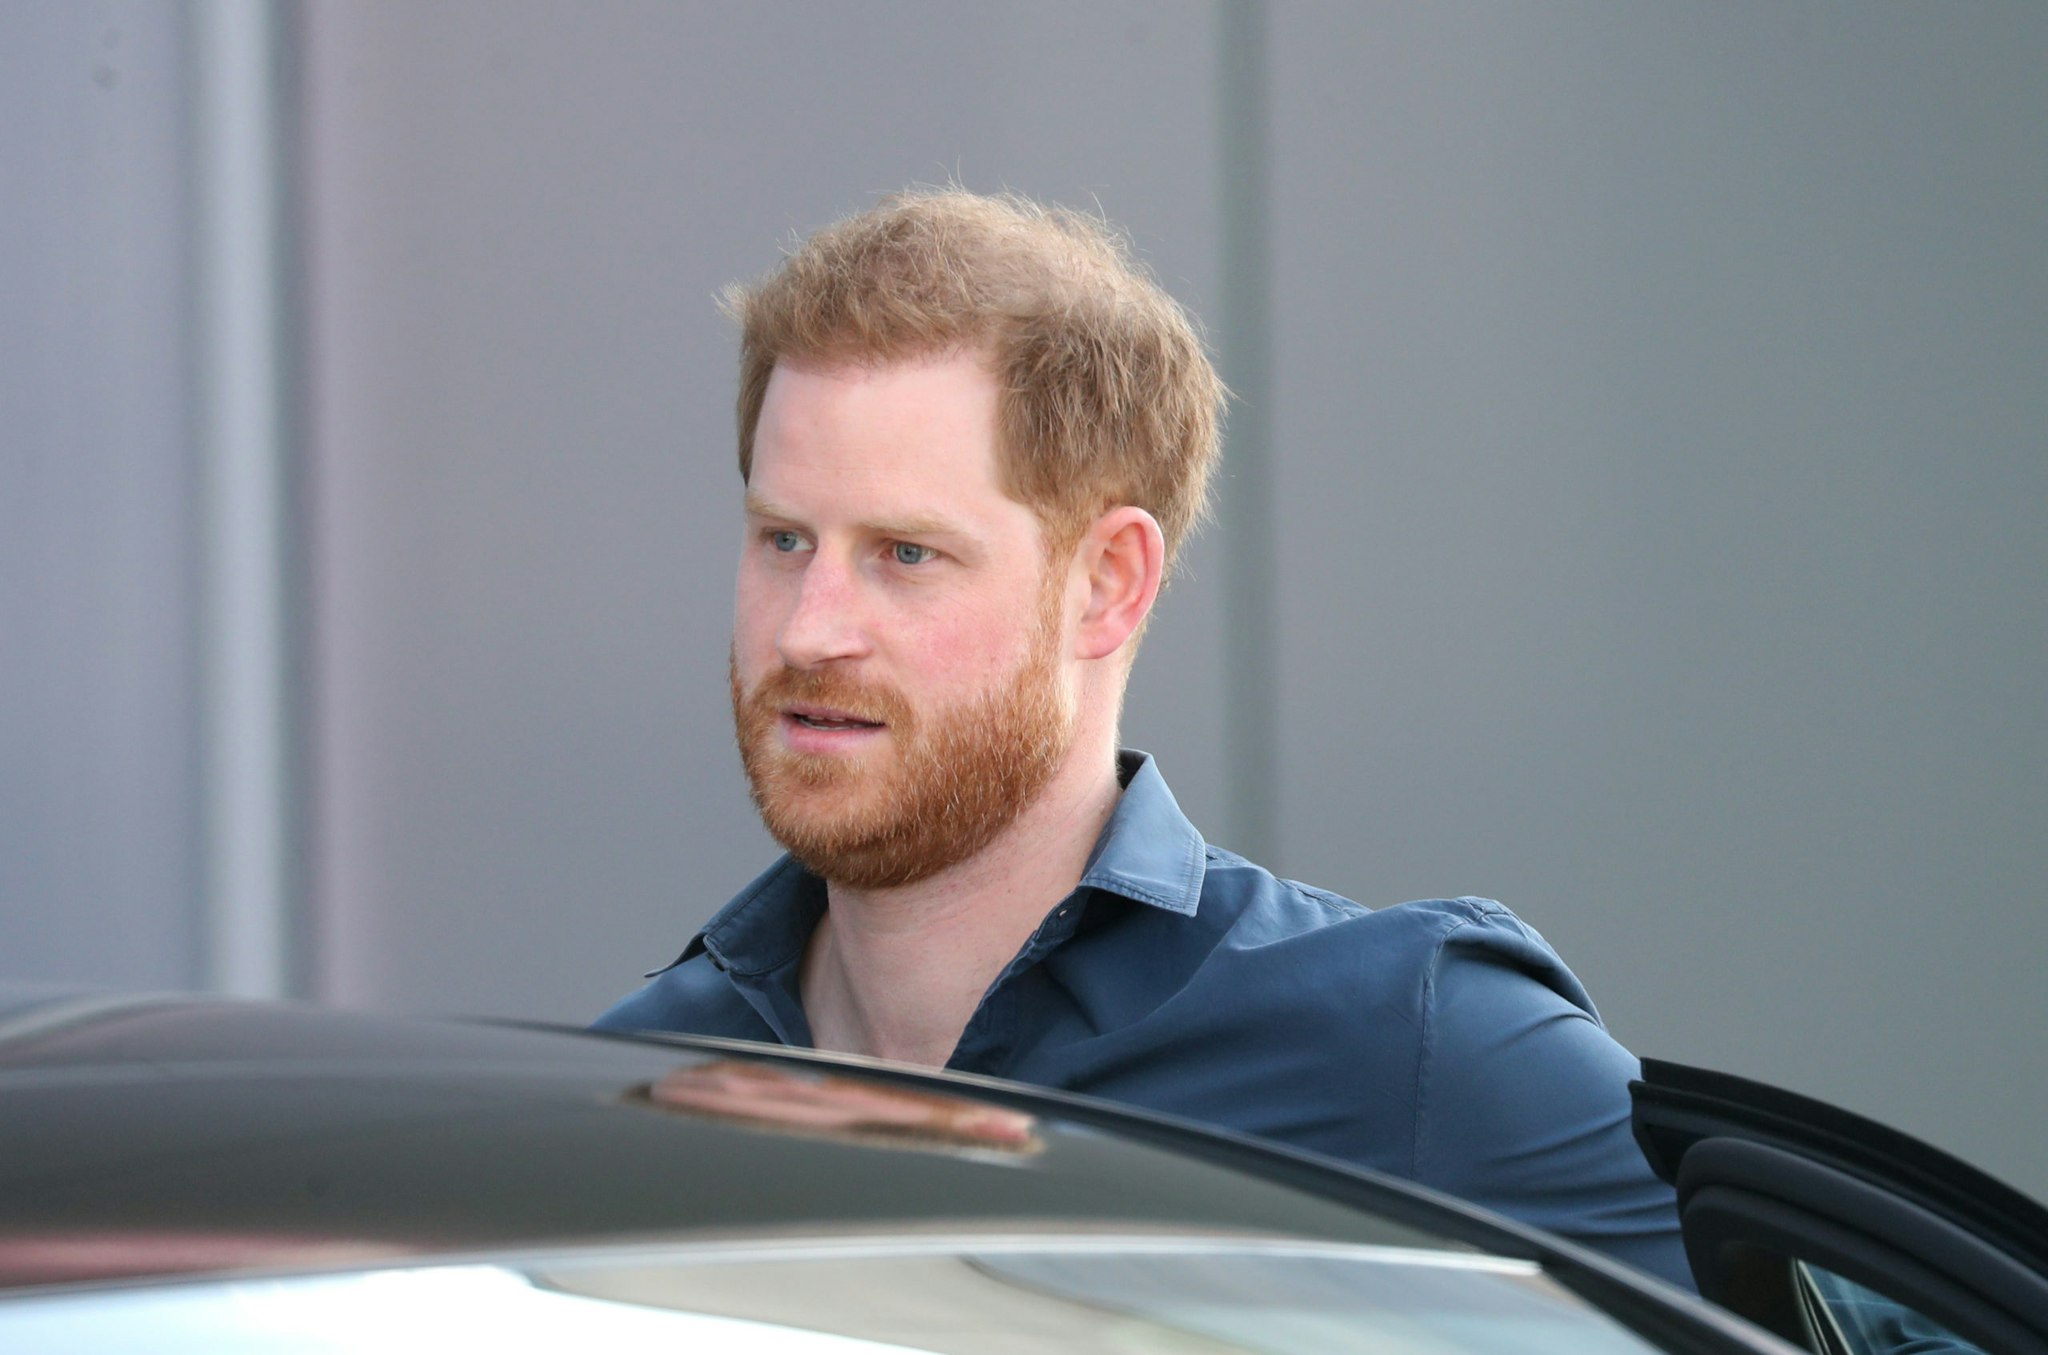 NORTHAMPTON, ENGLAND - MARCH 06: Prince Harry, Duke of Sussex arrives to officially open The Silverstone Experience at Silverstone on March 06, 2020 in Northampton, England. (Photo by Chris Jackson/Getty Images)